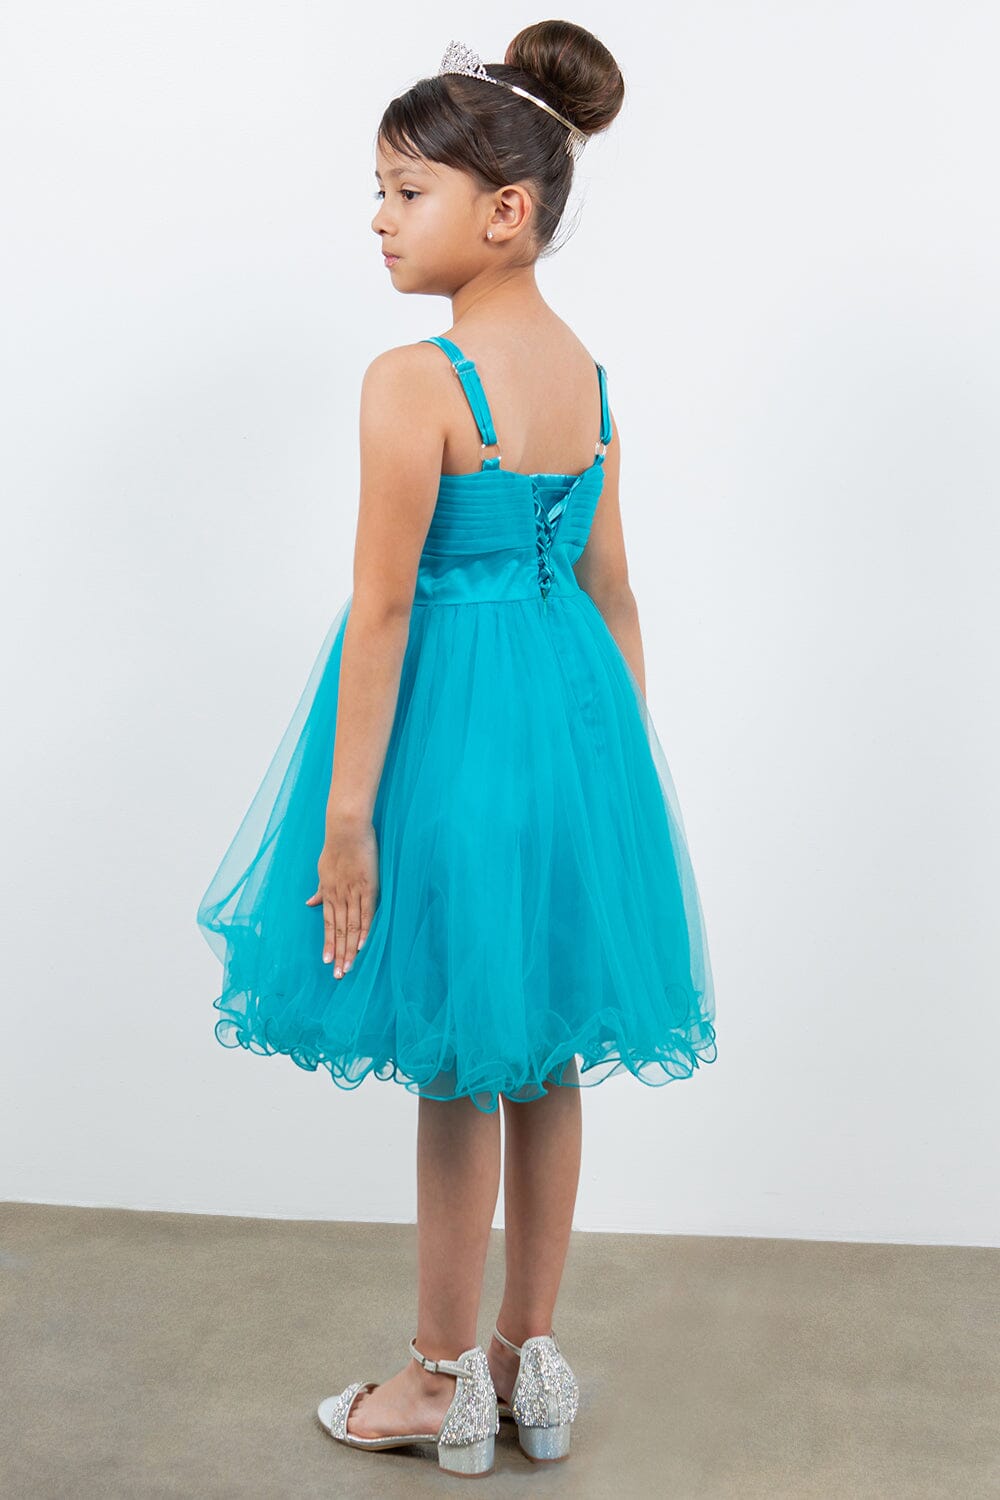 Girls Short Ruffled Dress with Corset Back by Cinderella Couture 65008